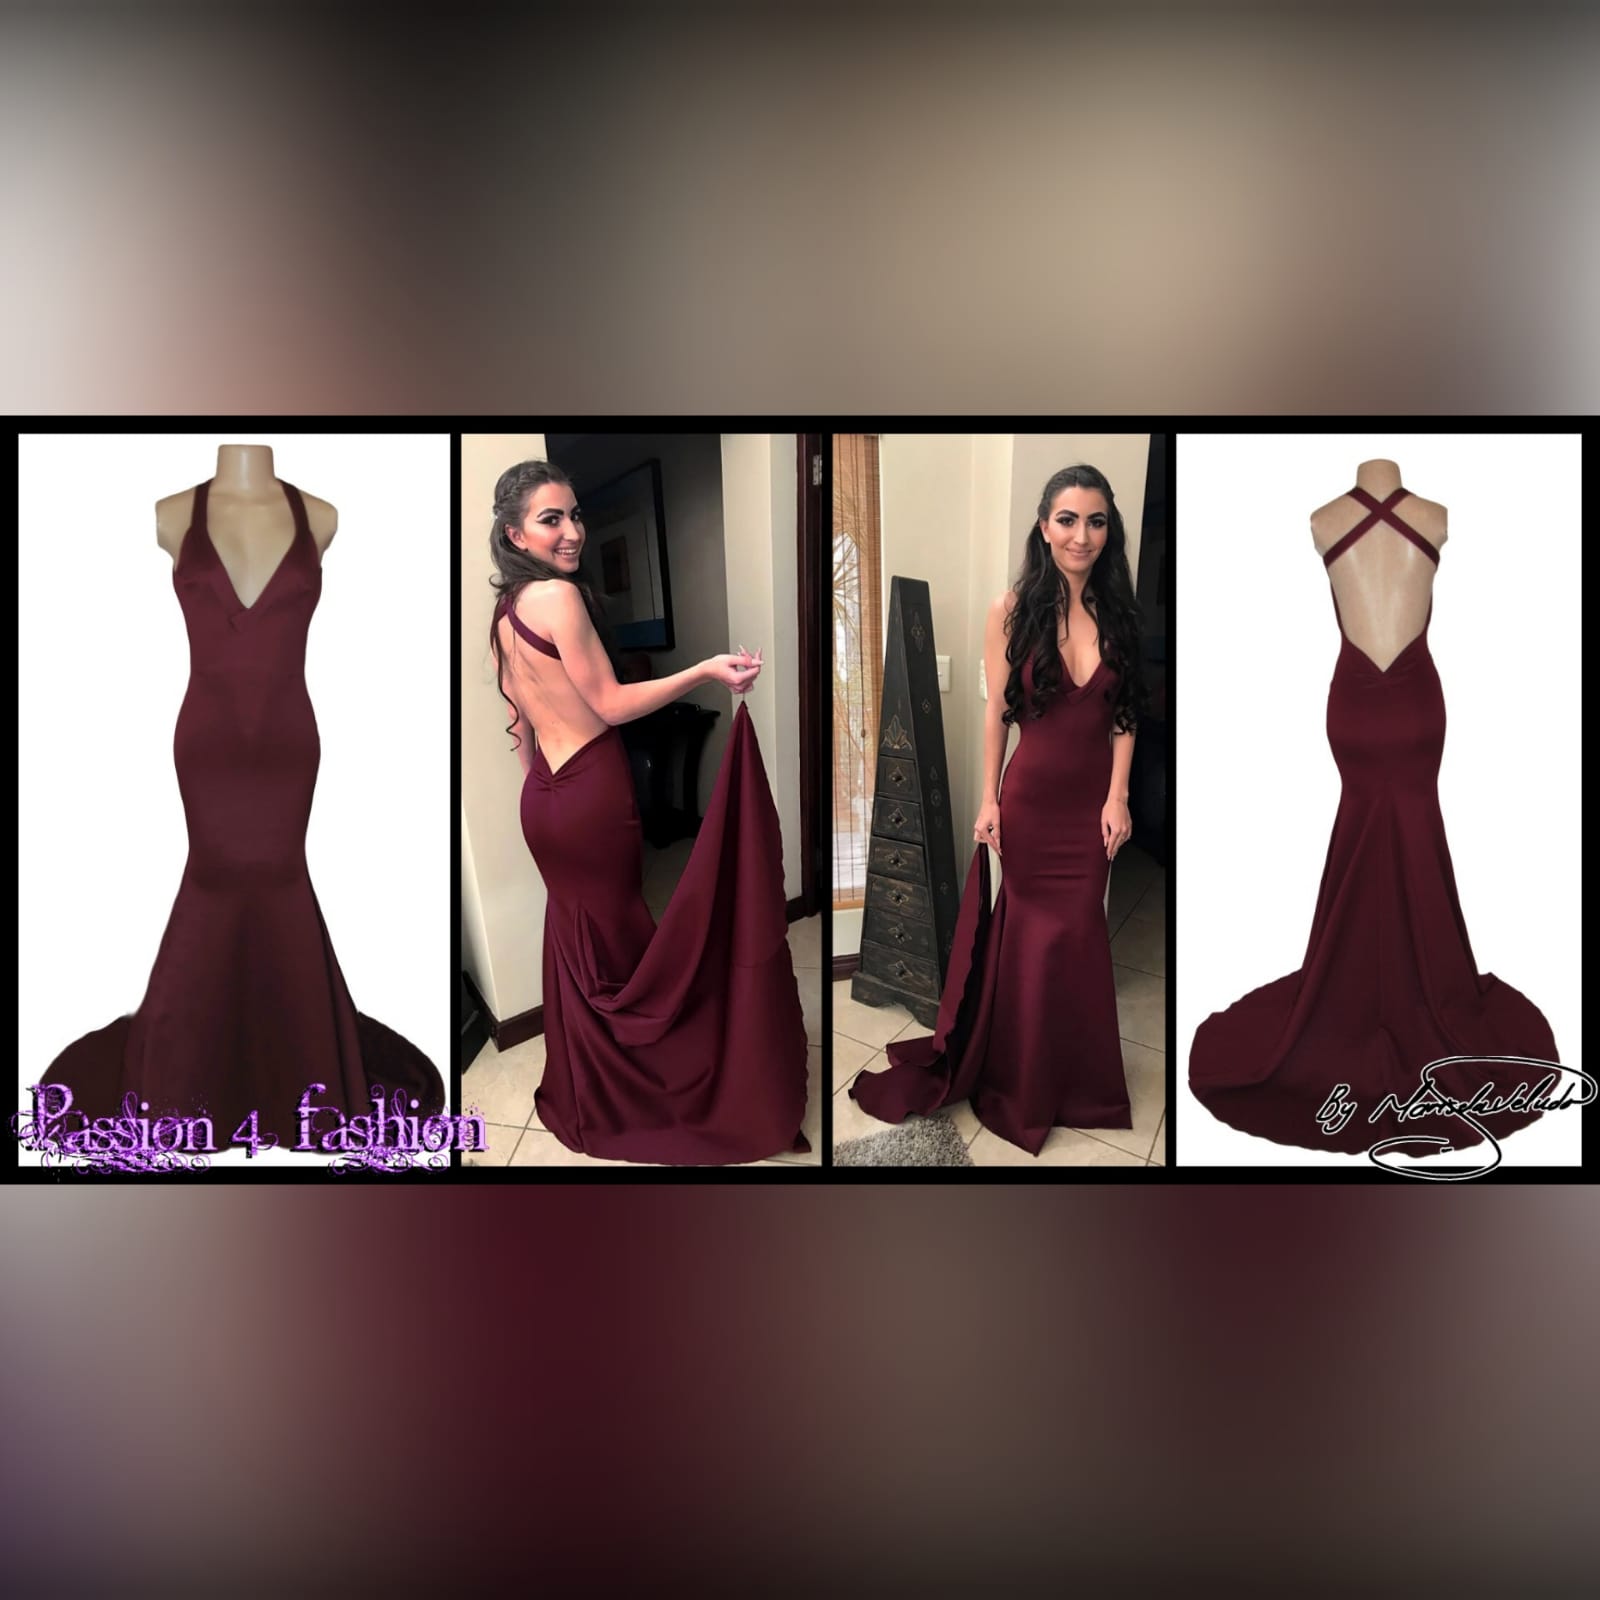 Burgundy soft mermaid sexy matric dress 2 burgundy soft mermaid sexy matric dress with a v neckline, low naked back and a train.